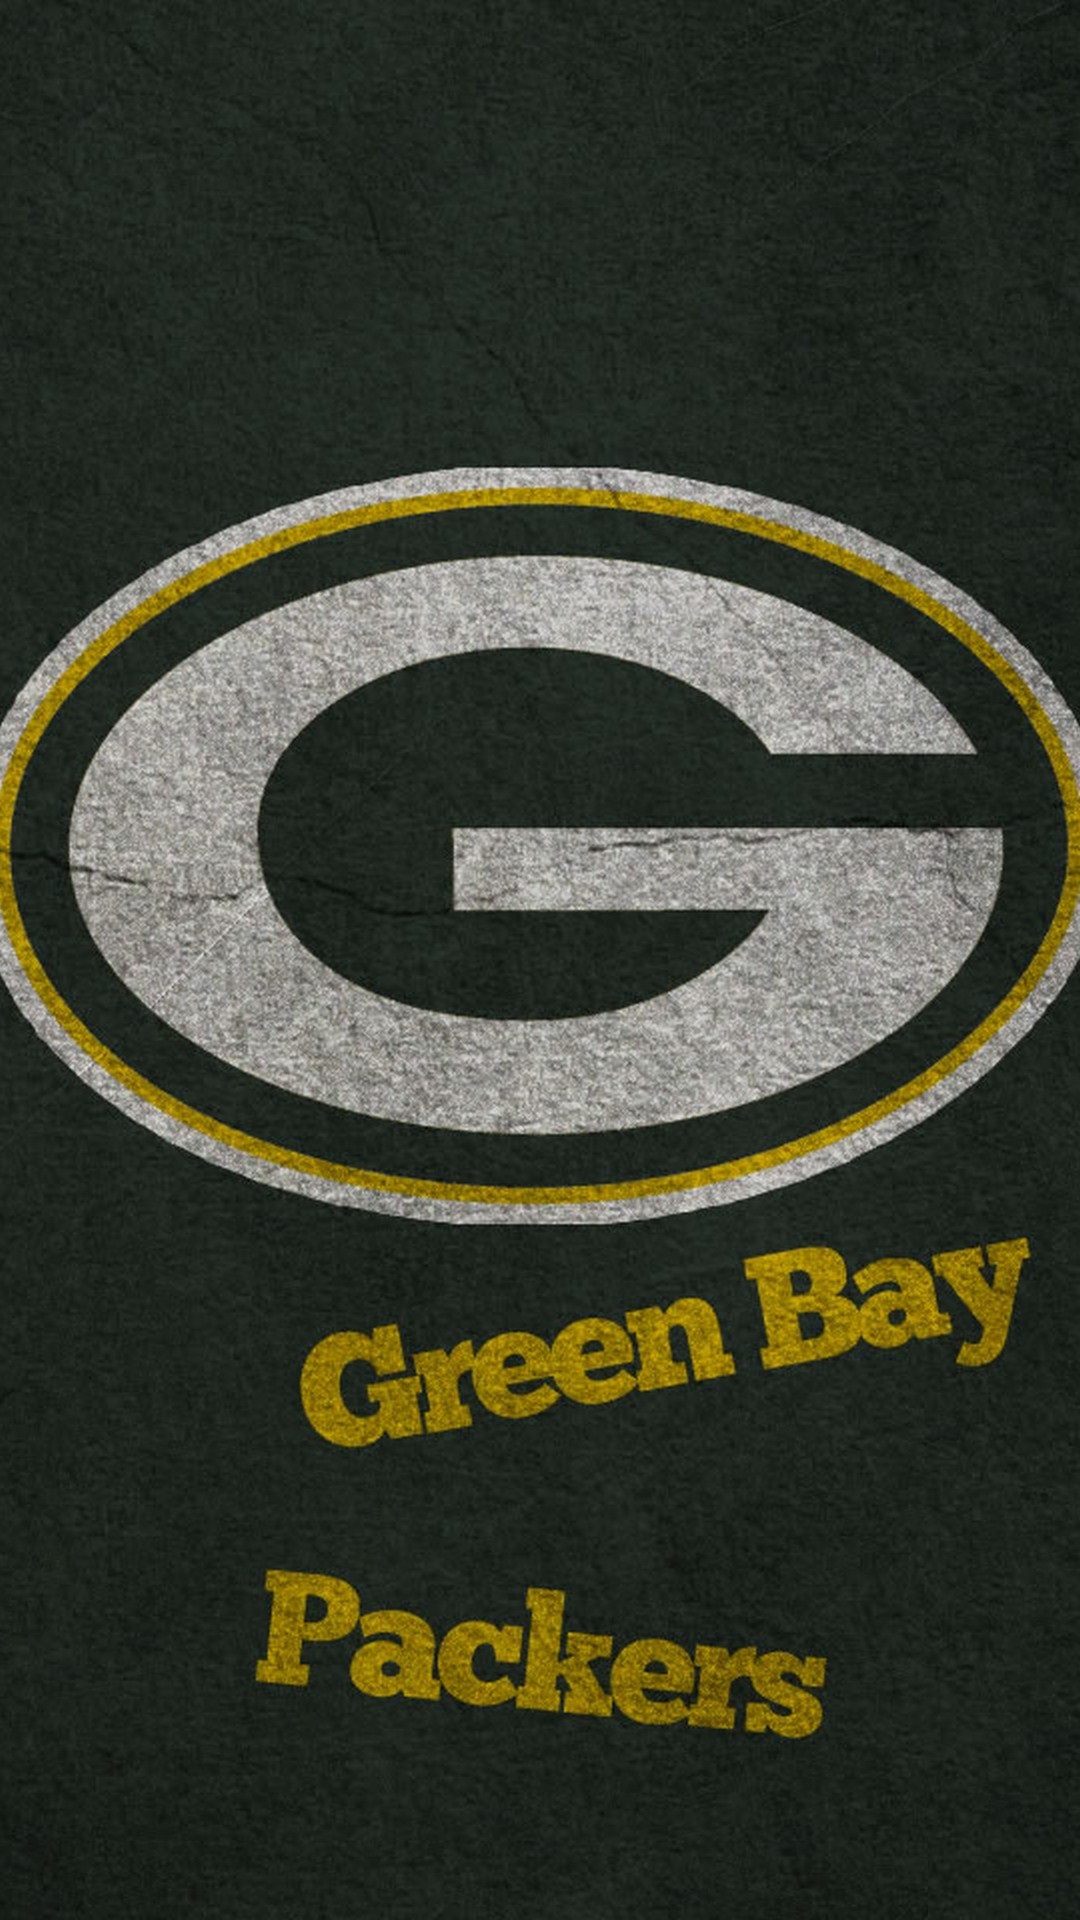 Green Bay Packers iPhone Wallpaper in HD With high-resolution 1080X1920 pixel. Download and set as wallpaper for Apple iPhone X, XS Max, XR, 8, 7, 6, SE, iPad, Android